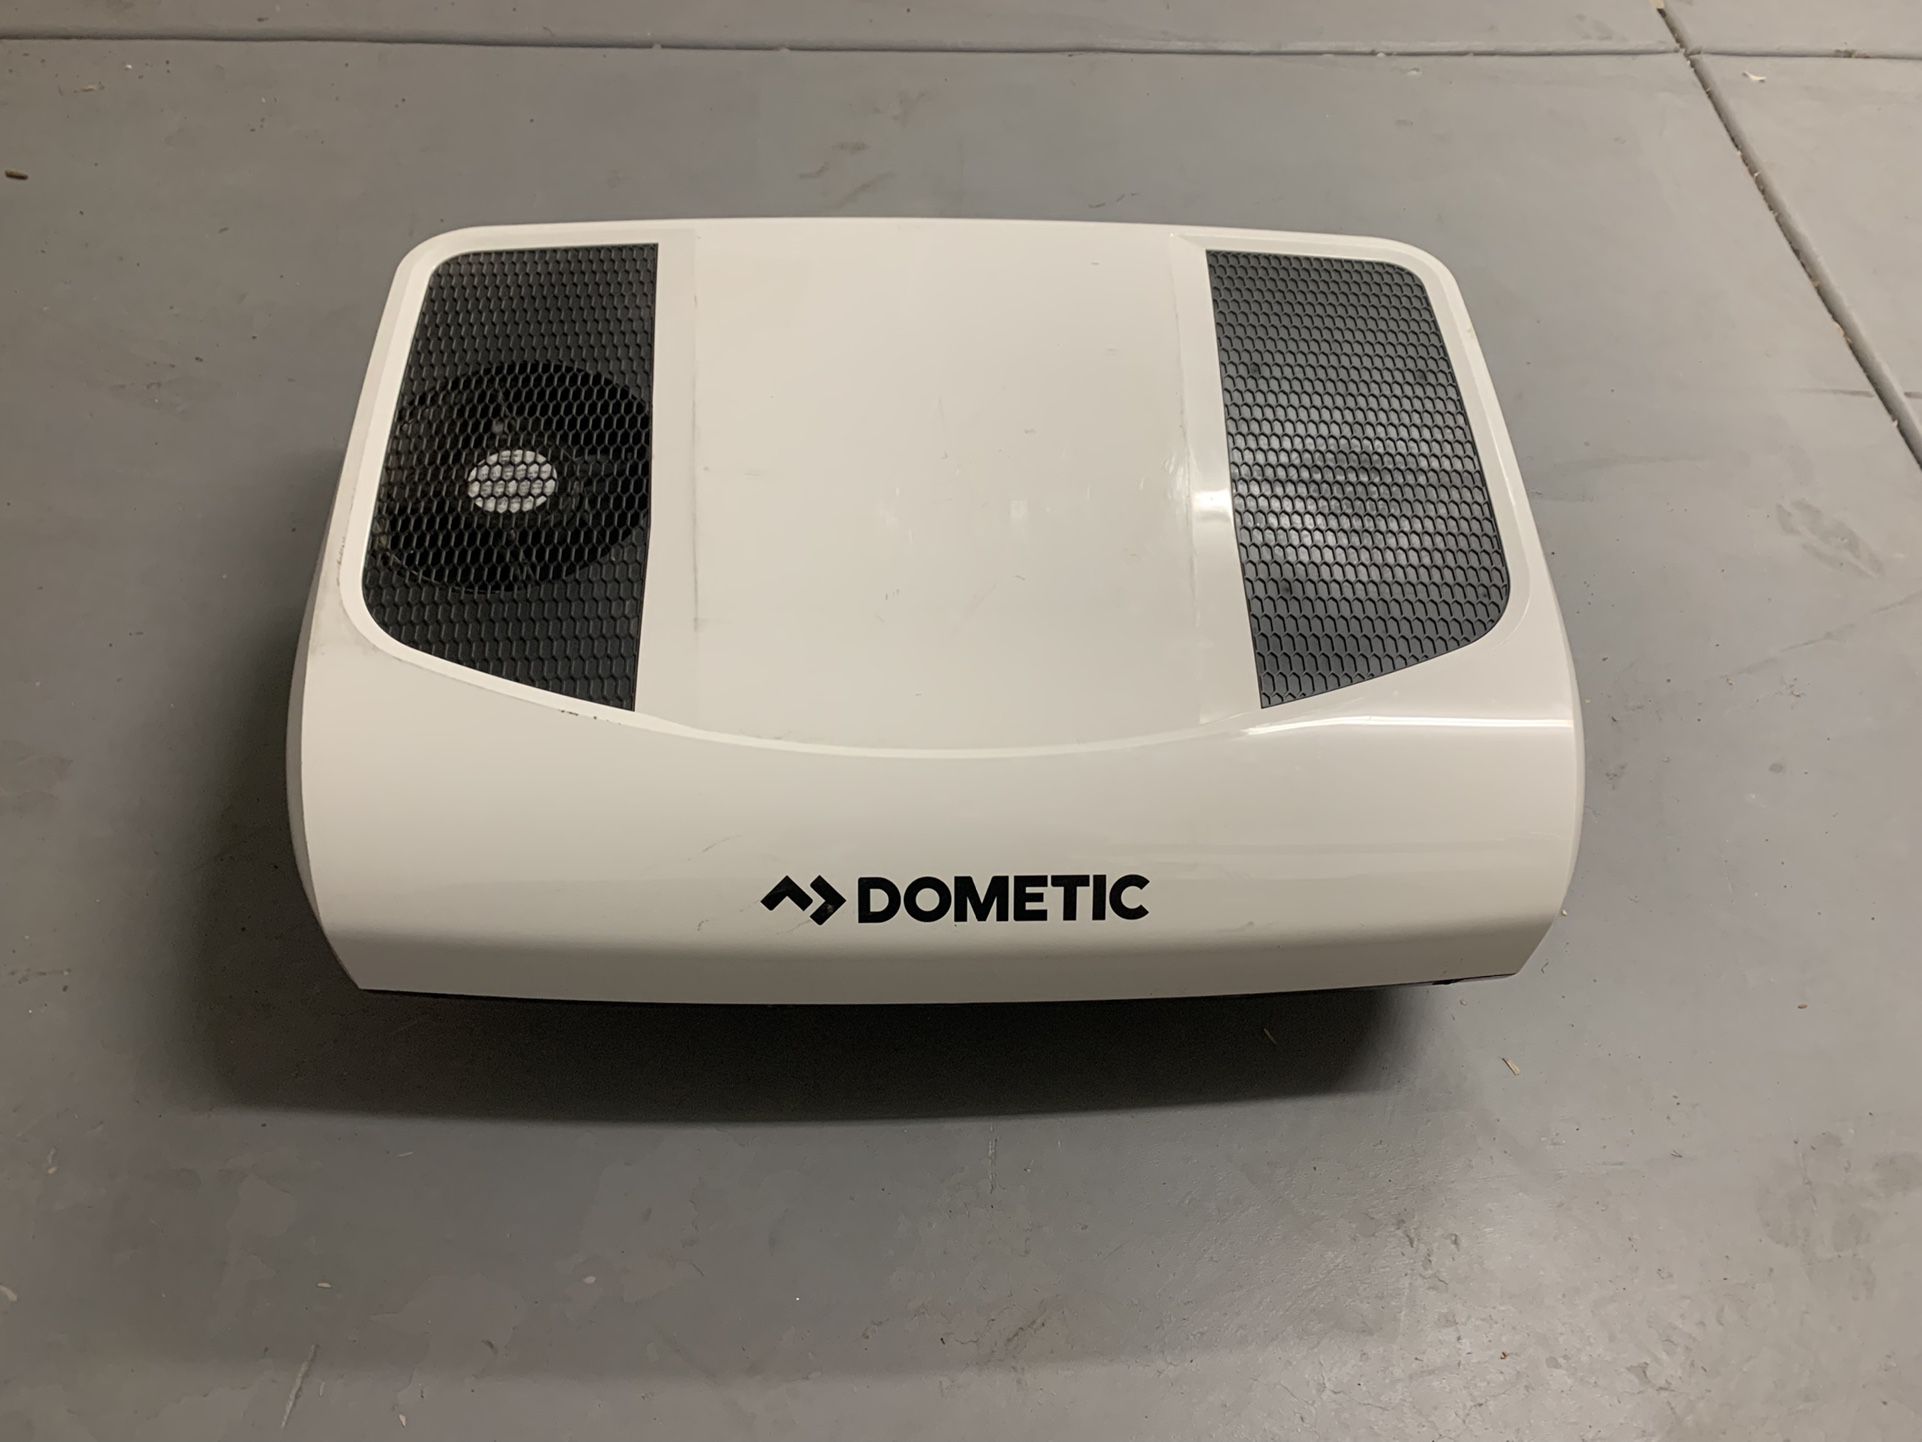 2022 Dometic RTX1000 for Sale in Las Vegas, NV - OfferUp